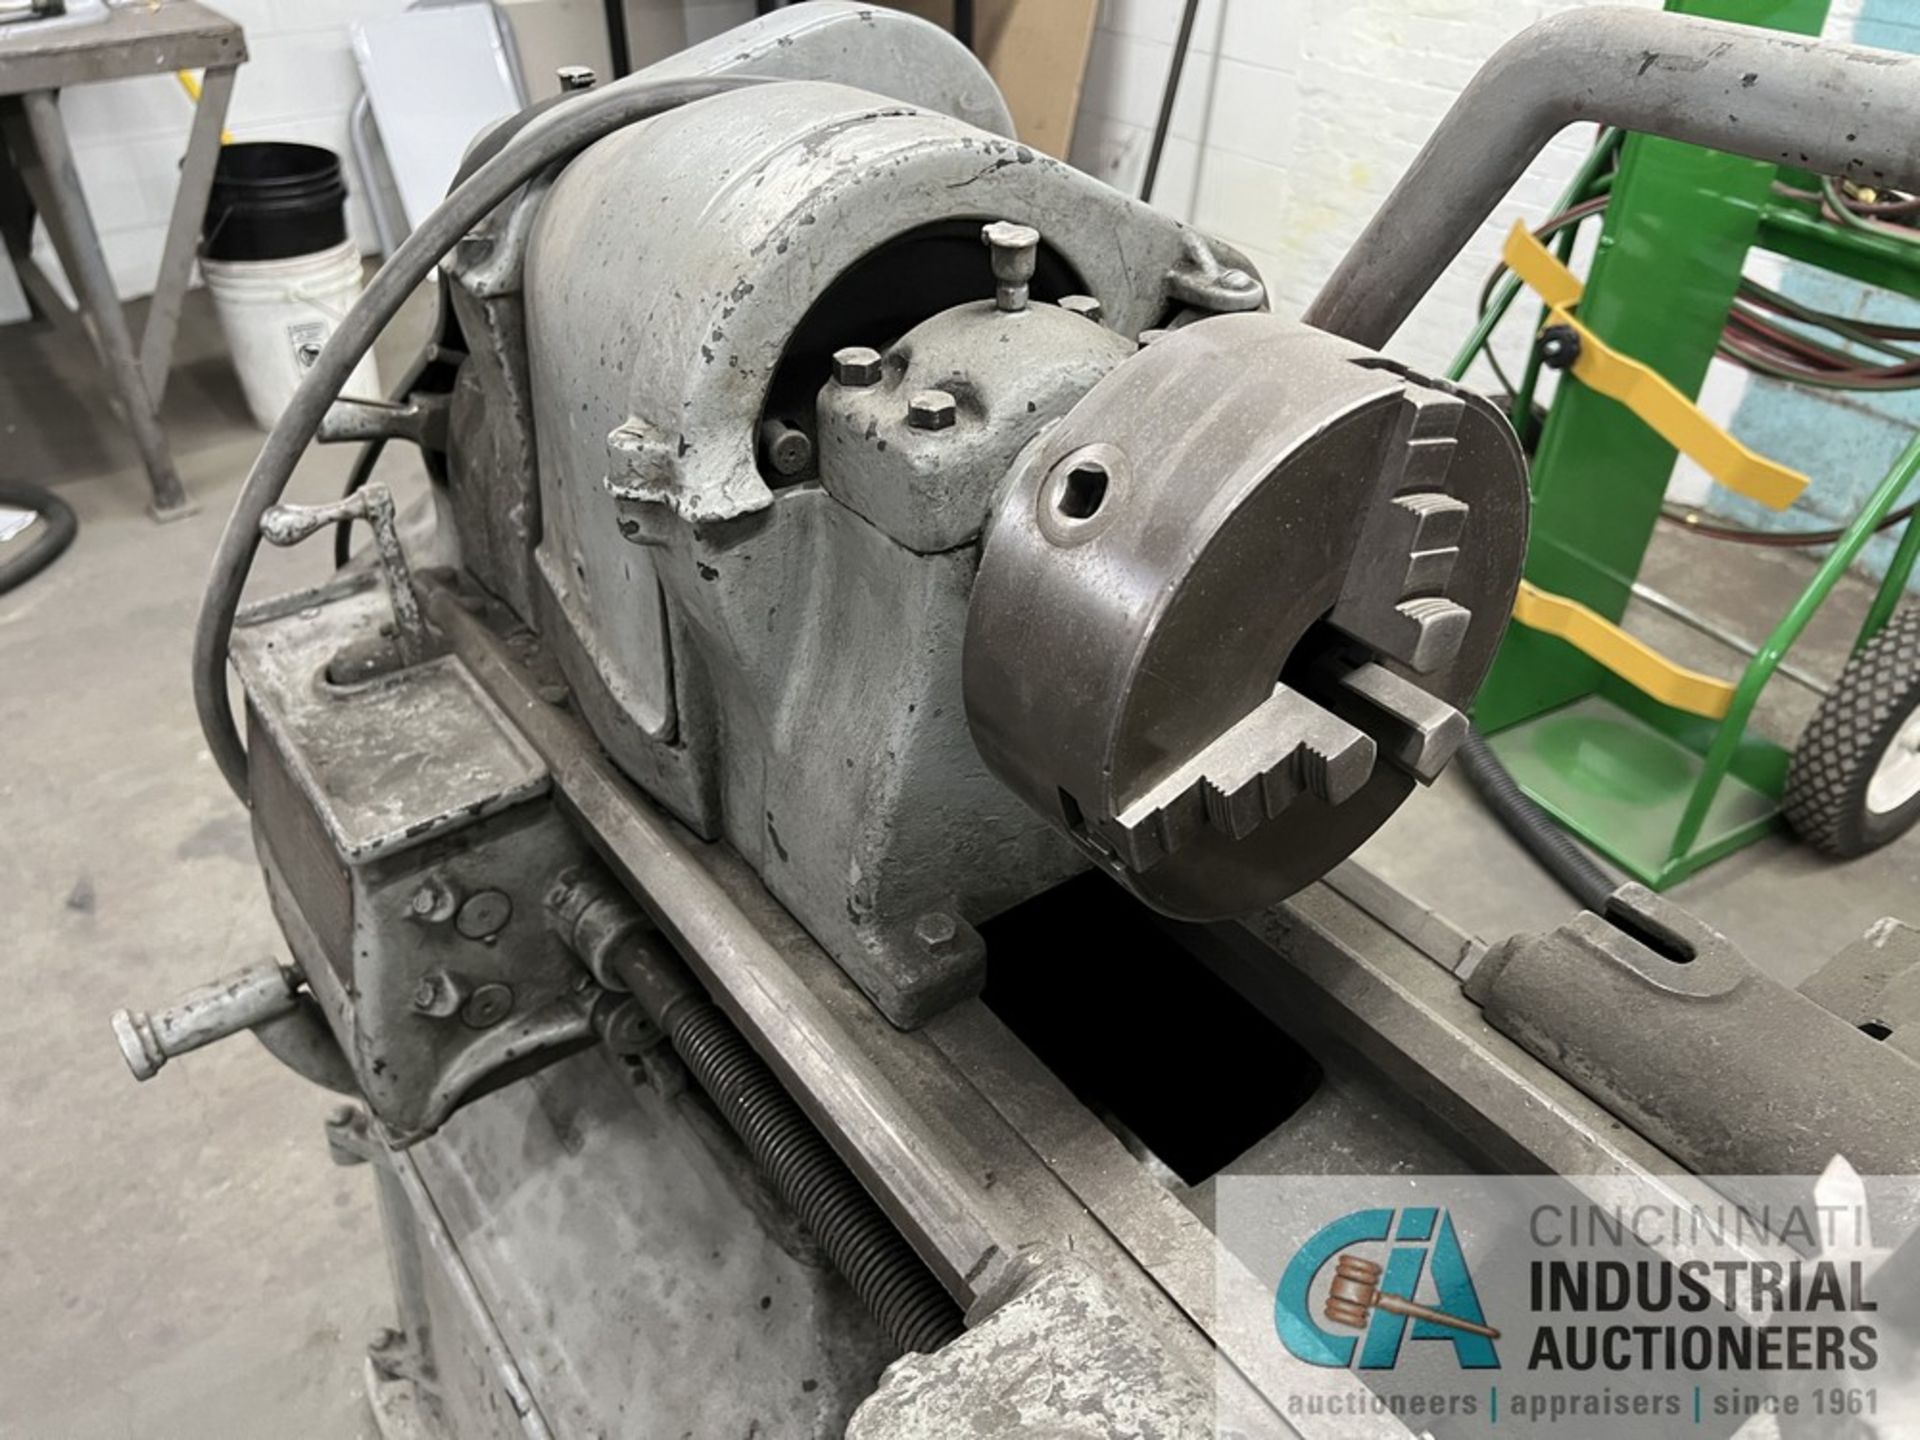 16" X 56" SOUTH BEND ENGINE LATHE; S/N 50199, 7-1/2" 3-JAW CHUCK, TOOLHOLDER, TAILSTOCK - Image 4 of 7